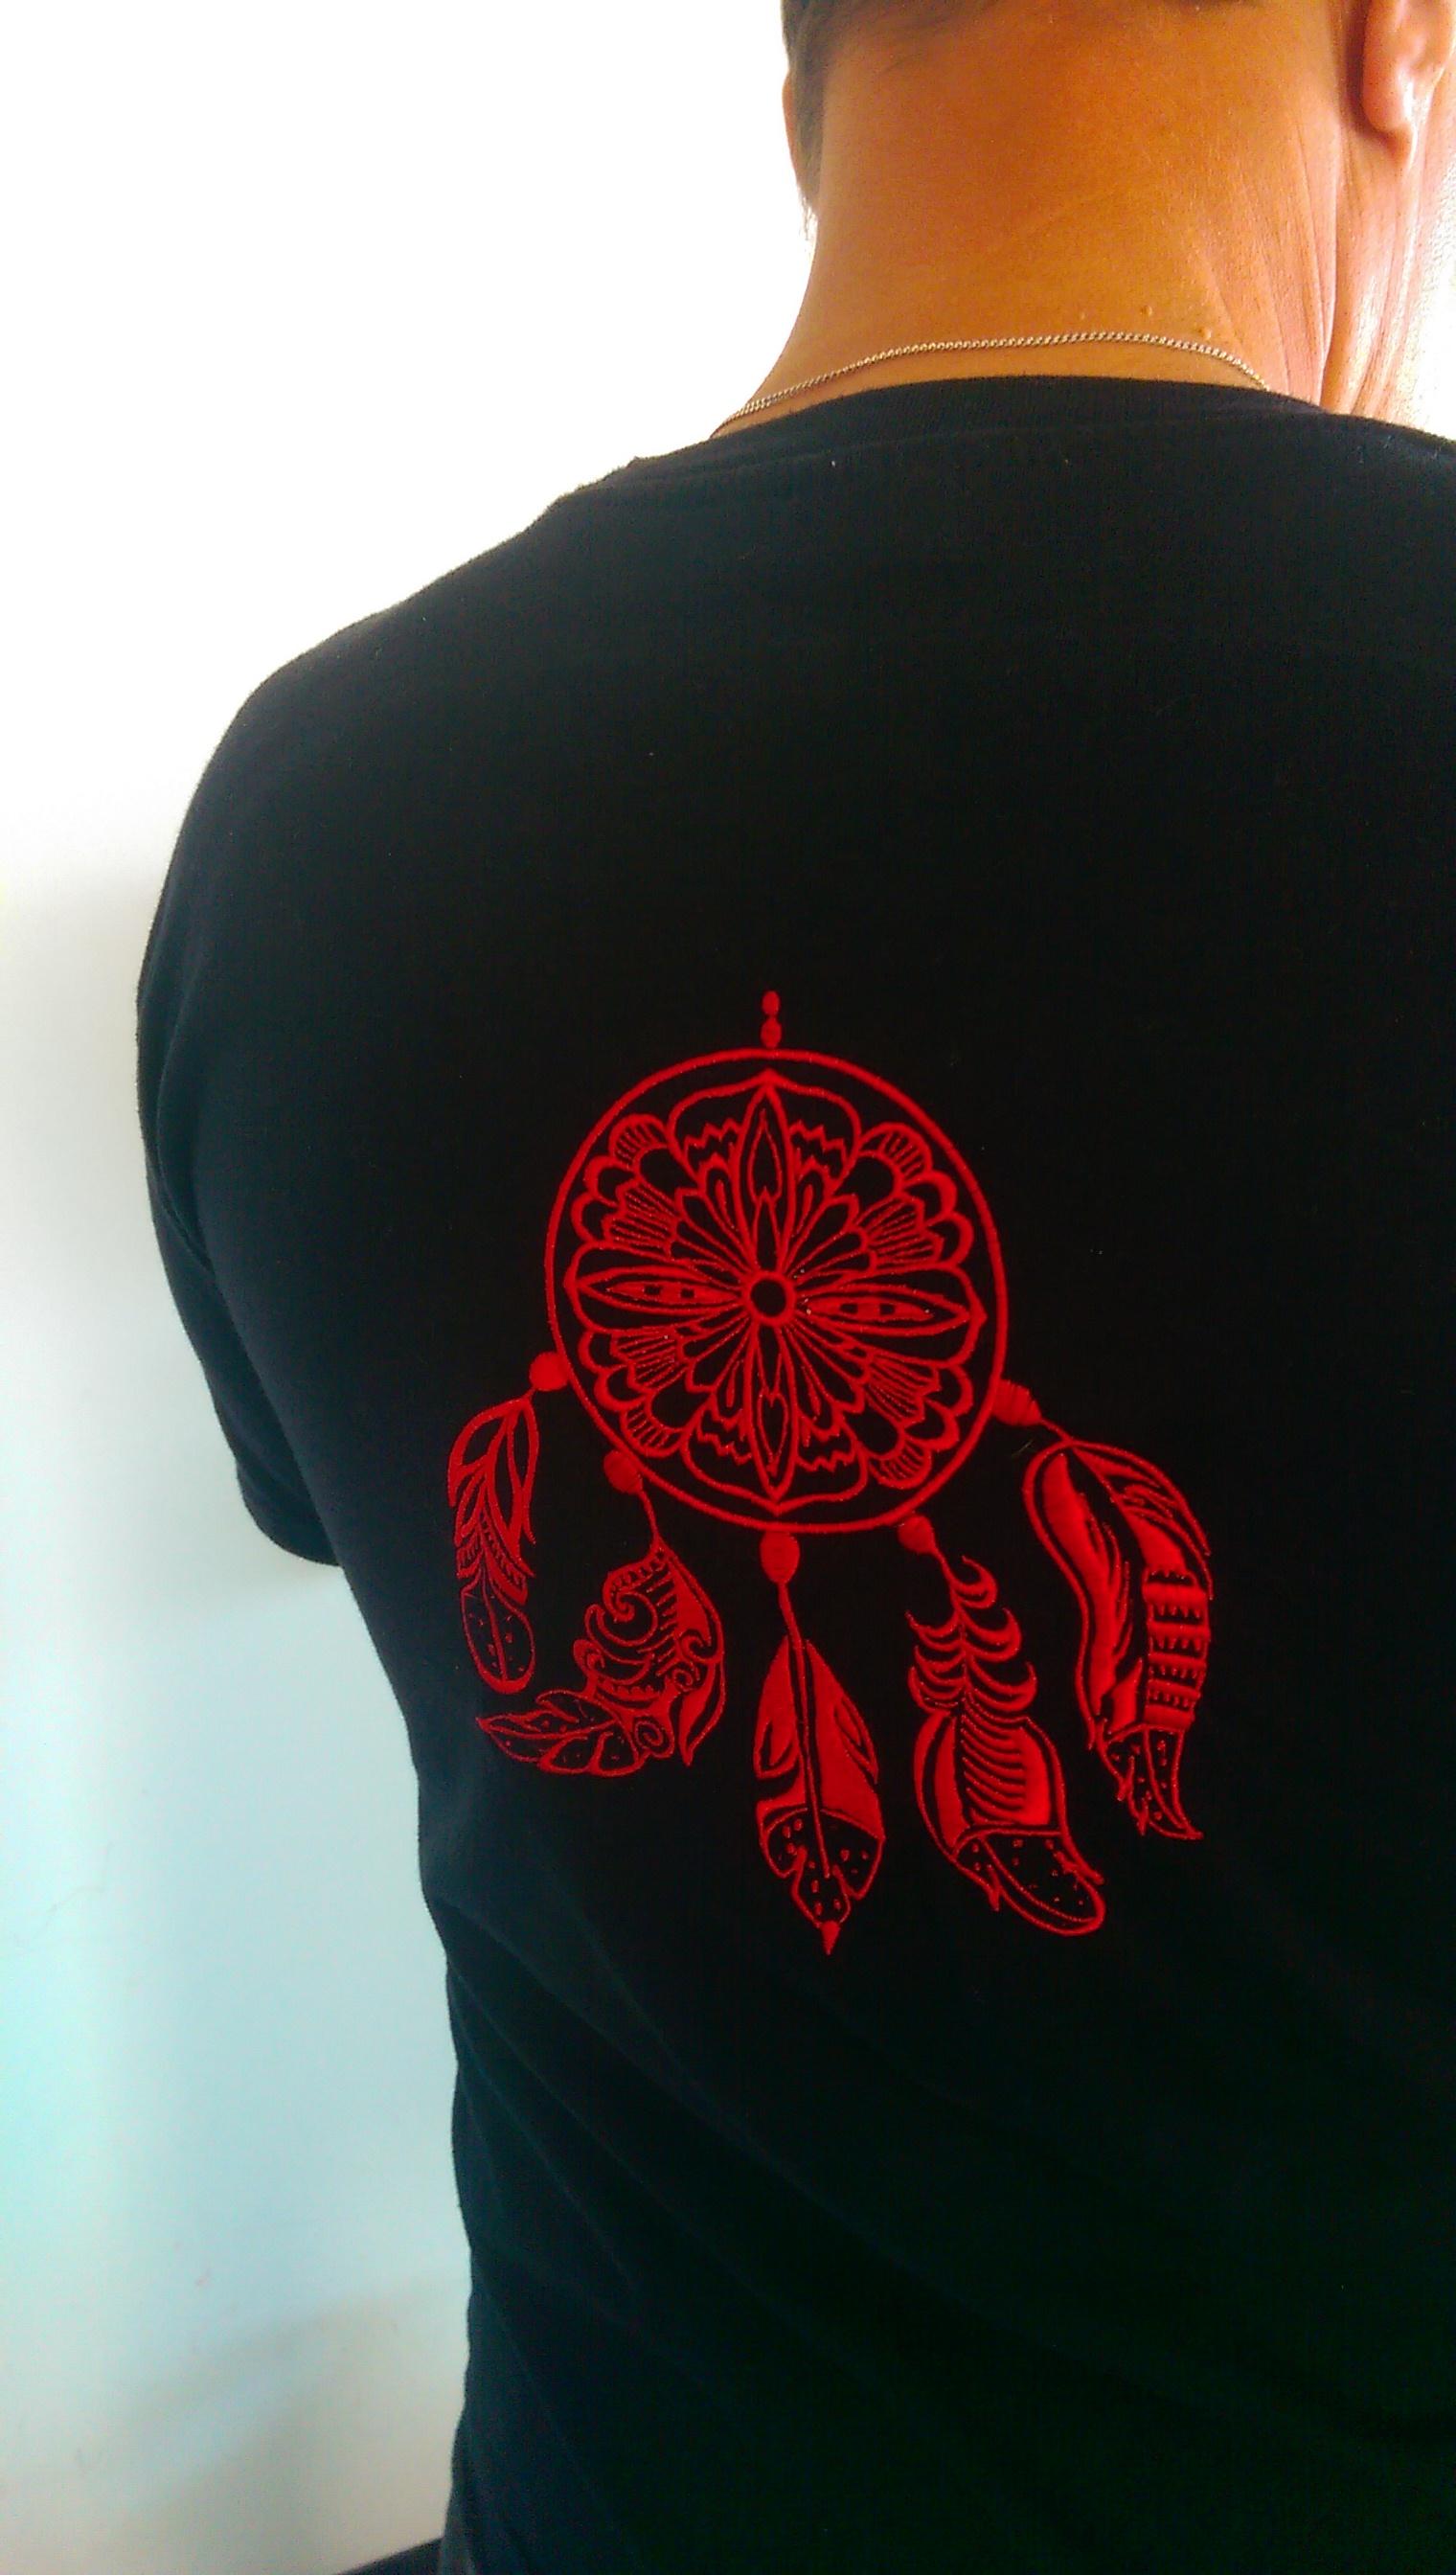 T-shirt decorated with Dreamcatcher embroidery design